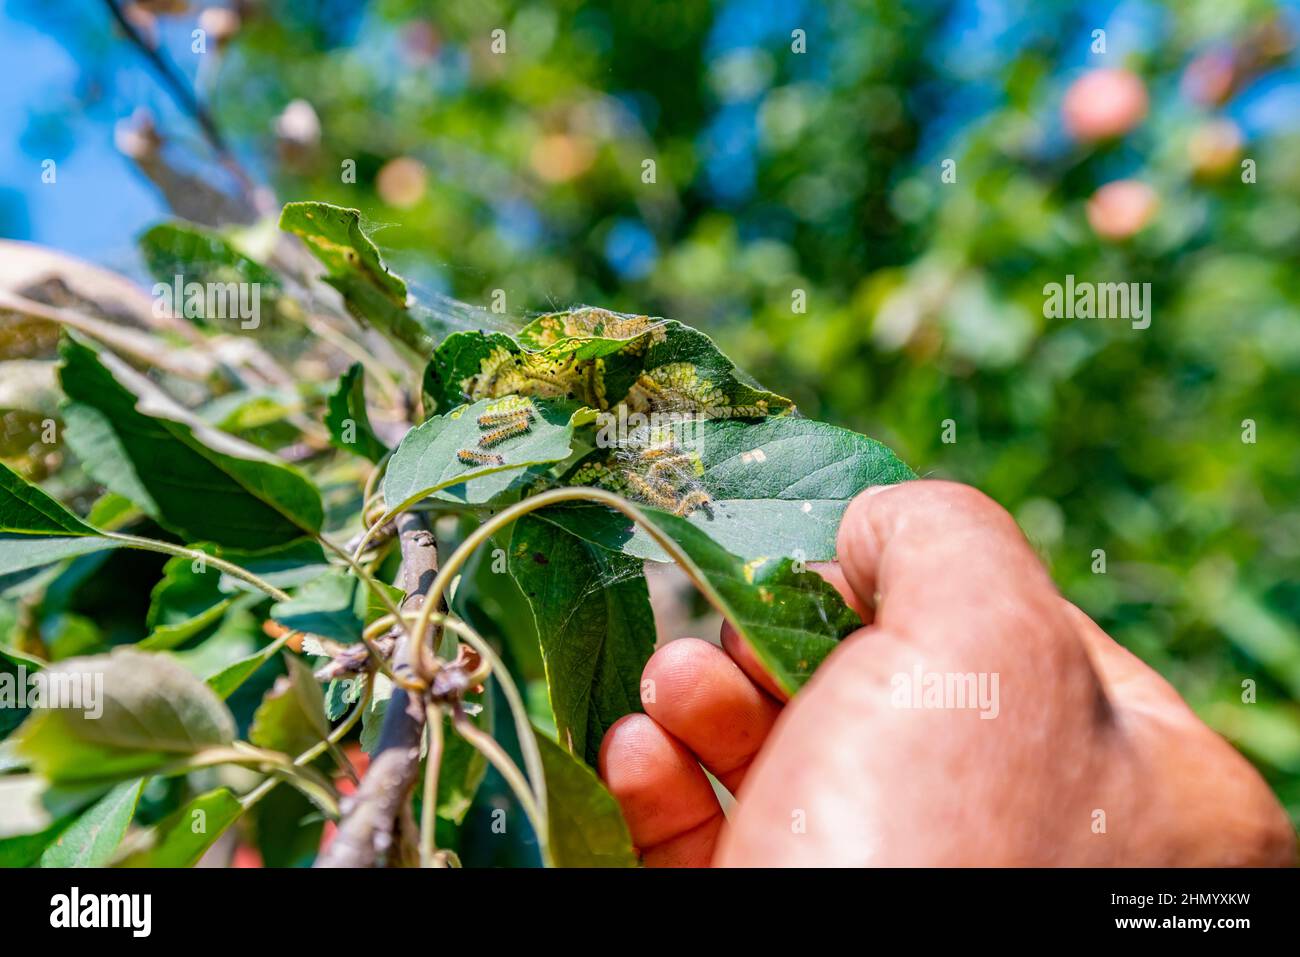 Pest caterpillars on the leaves of a young tree Stock Photo